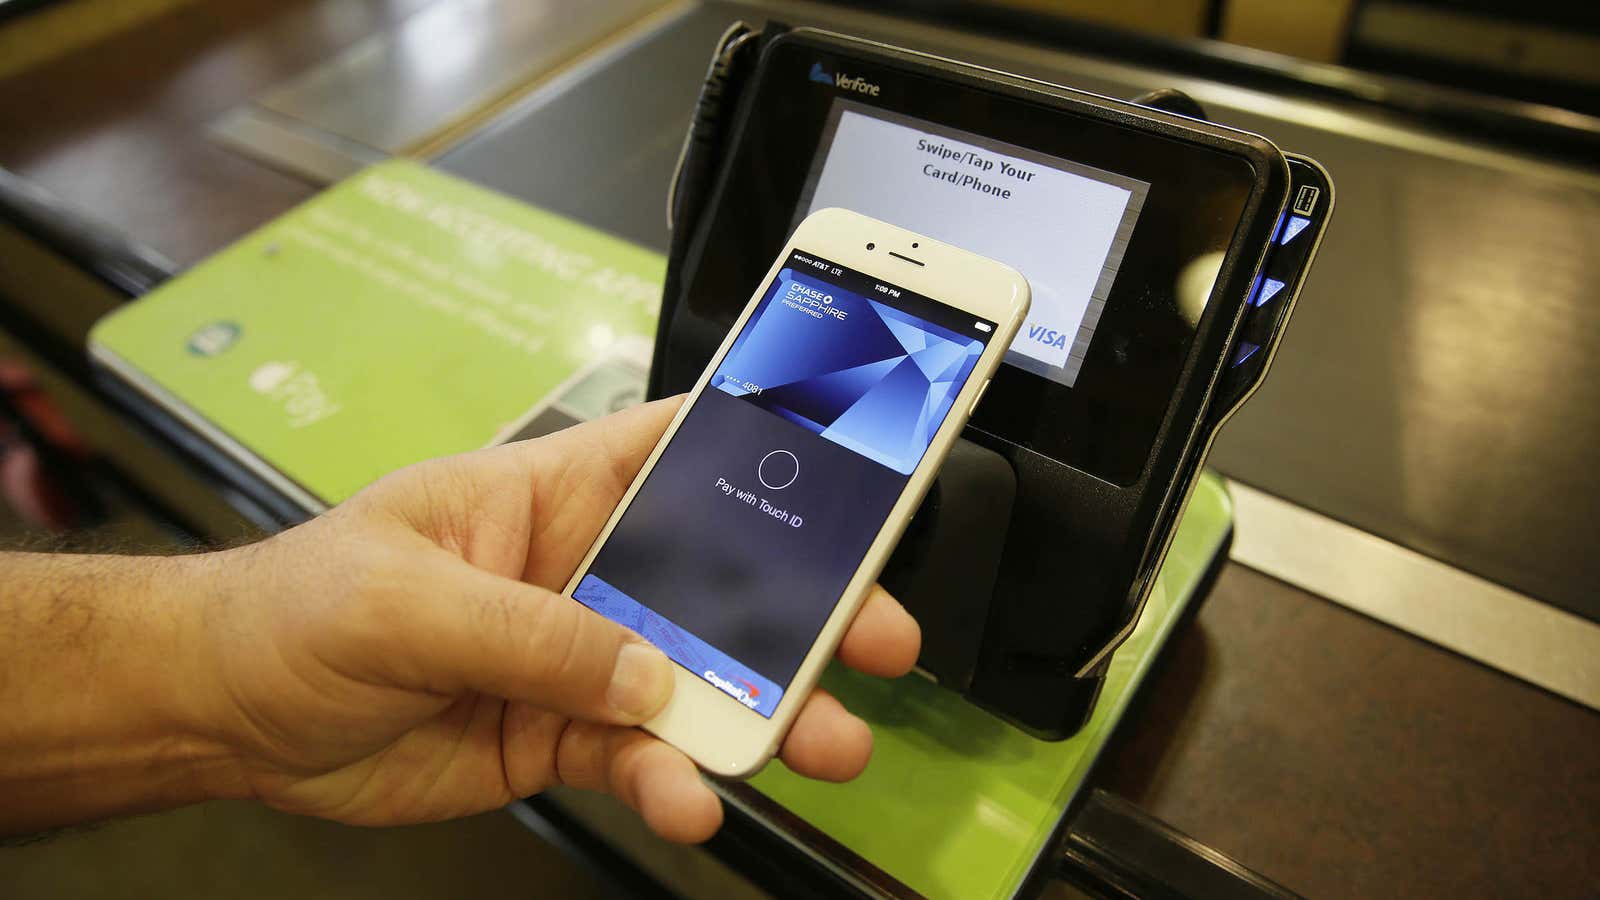 Apple Pay is more secure than most ways to pay, but customers have no idea.